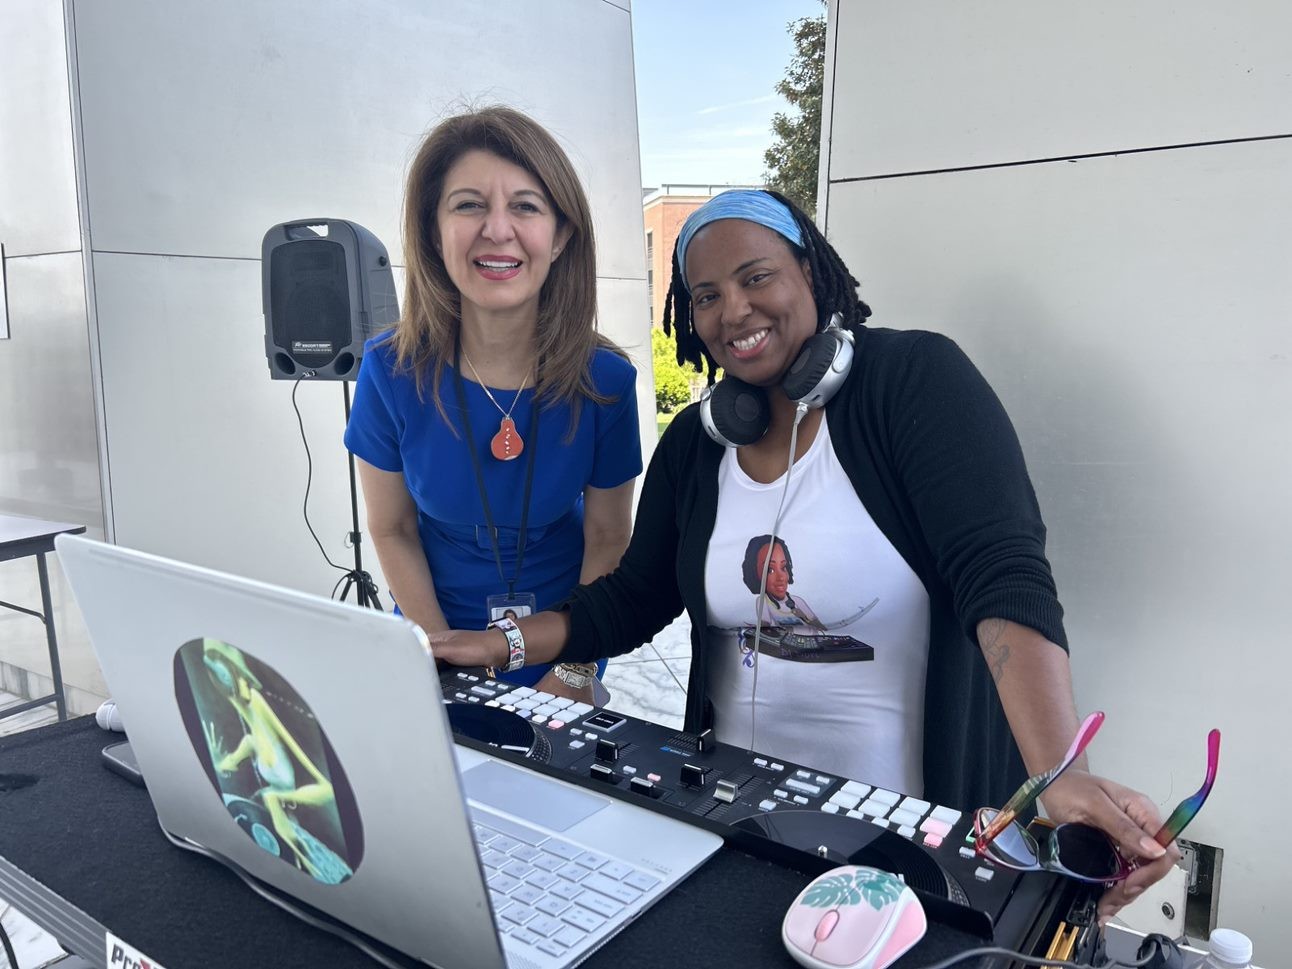 Richmond Fed Chief Information Officer Ghada Ijam and Fed employee DJ Dorian Henry at an employee appreciation event.